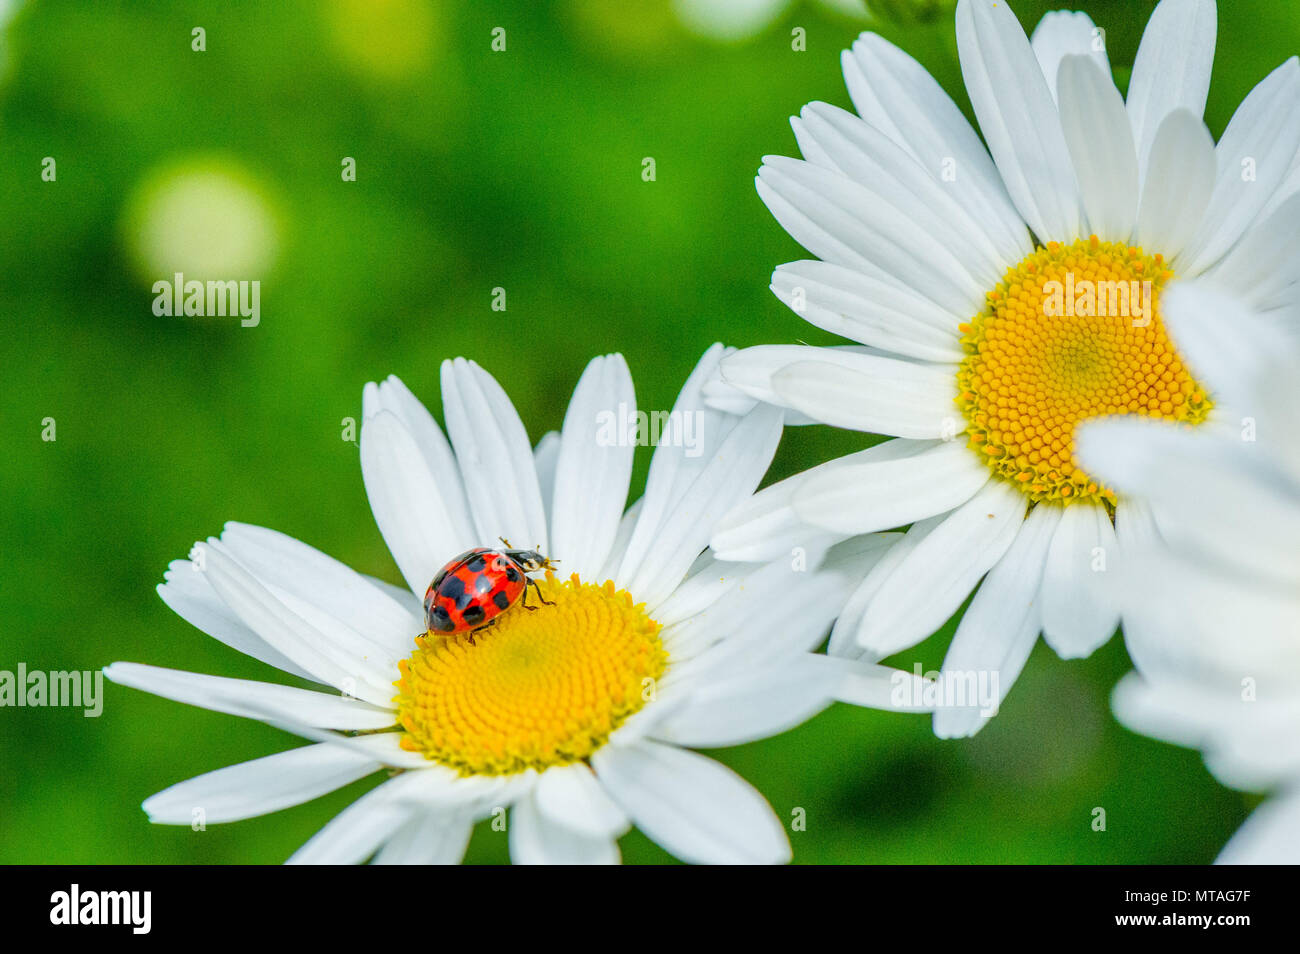 Harlequin Ladybird consuming pollen from a Oxeye daisy flower. Stock Photo